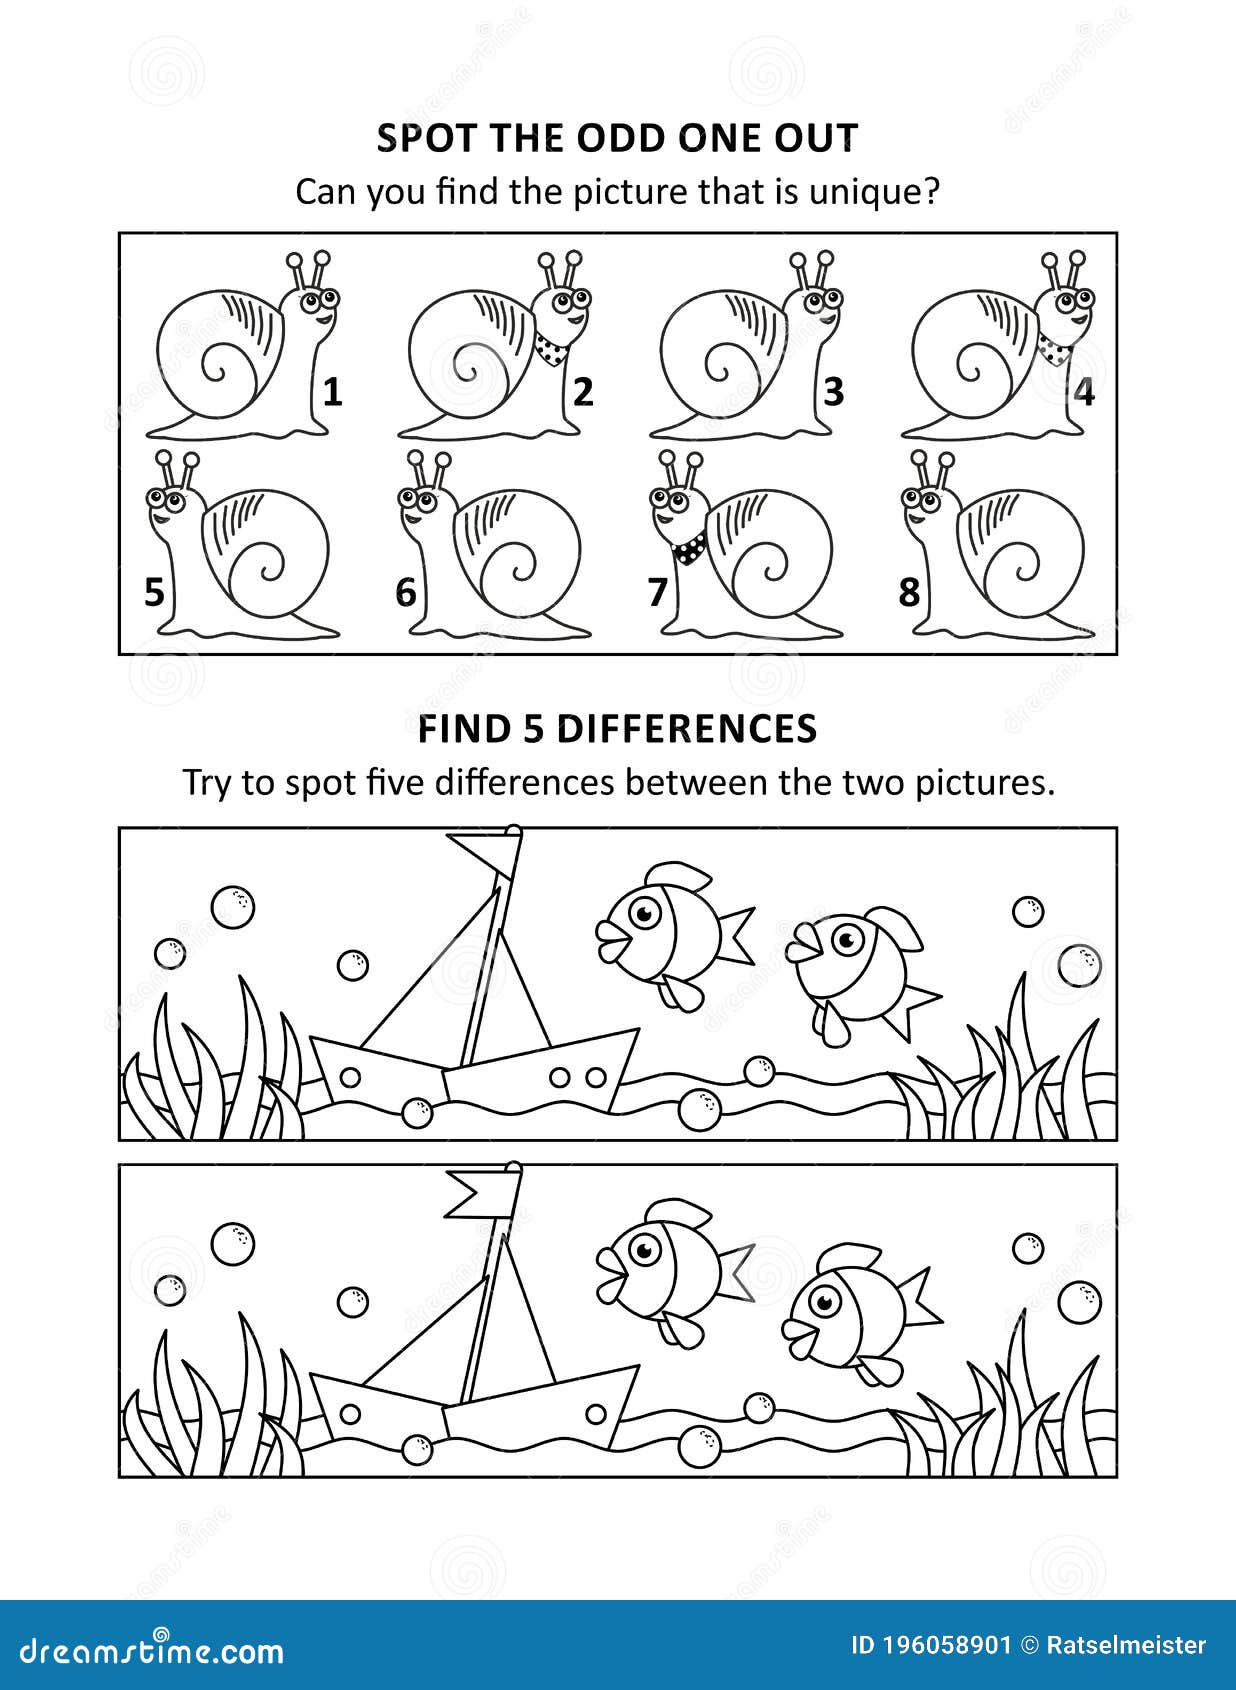 activity sheet for kids with two puzzles